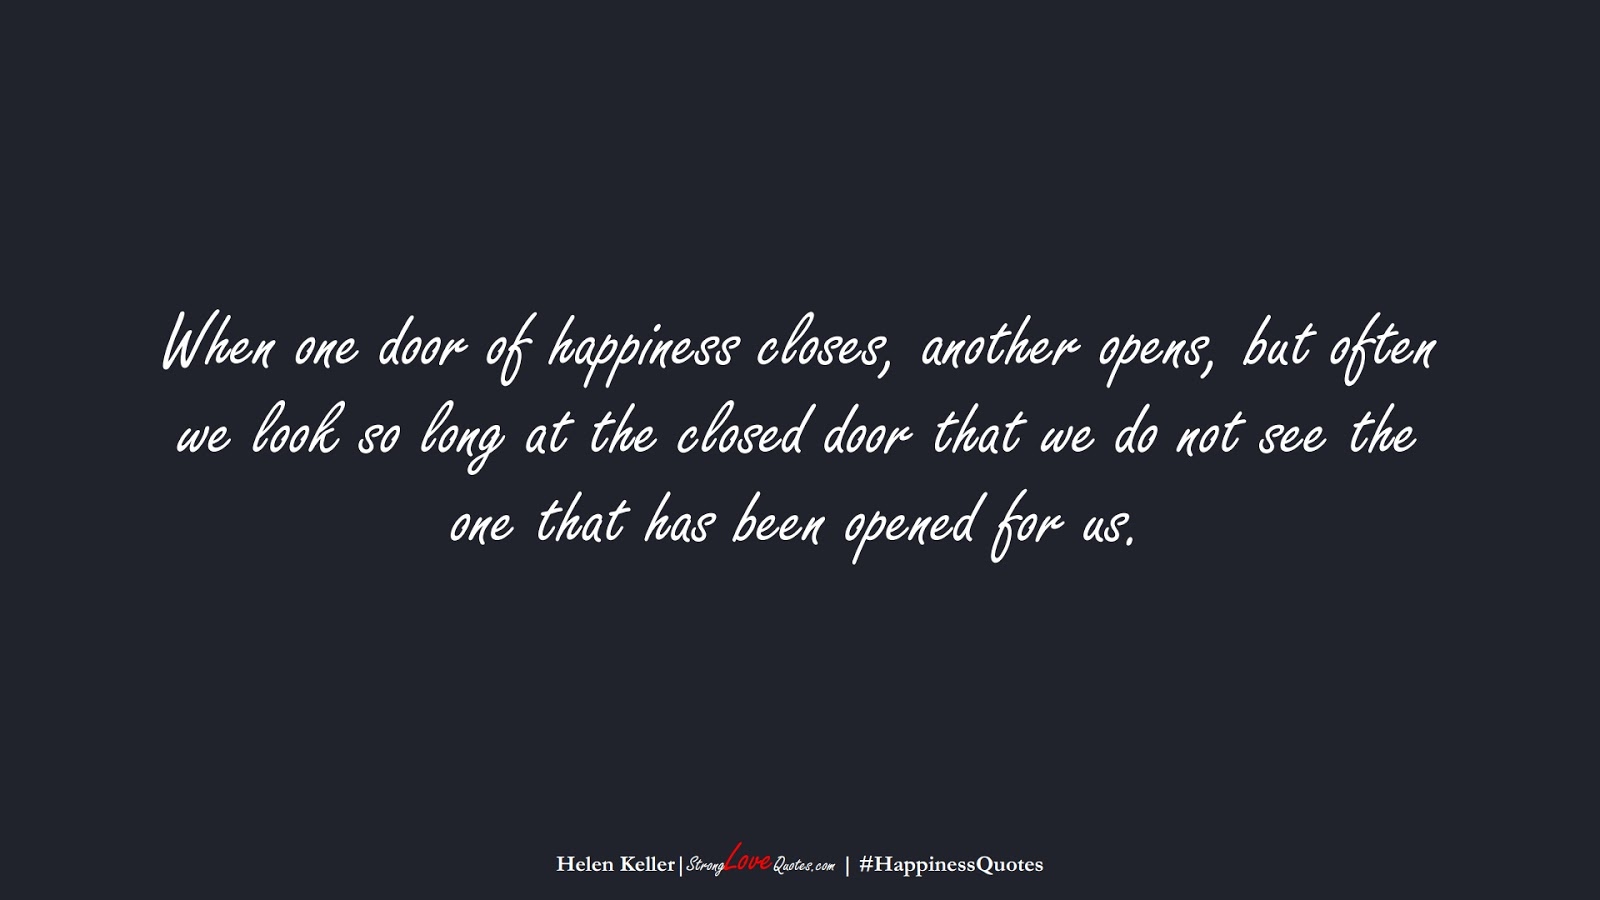 When one door of happiness closes, another opens, but often we look so long at the closed door that we do not see the one that has been opened for us. (Helen Keller);  #HappinessQuotes